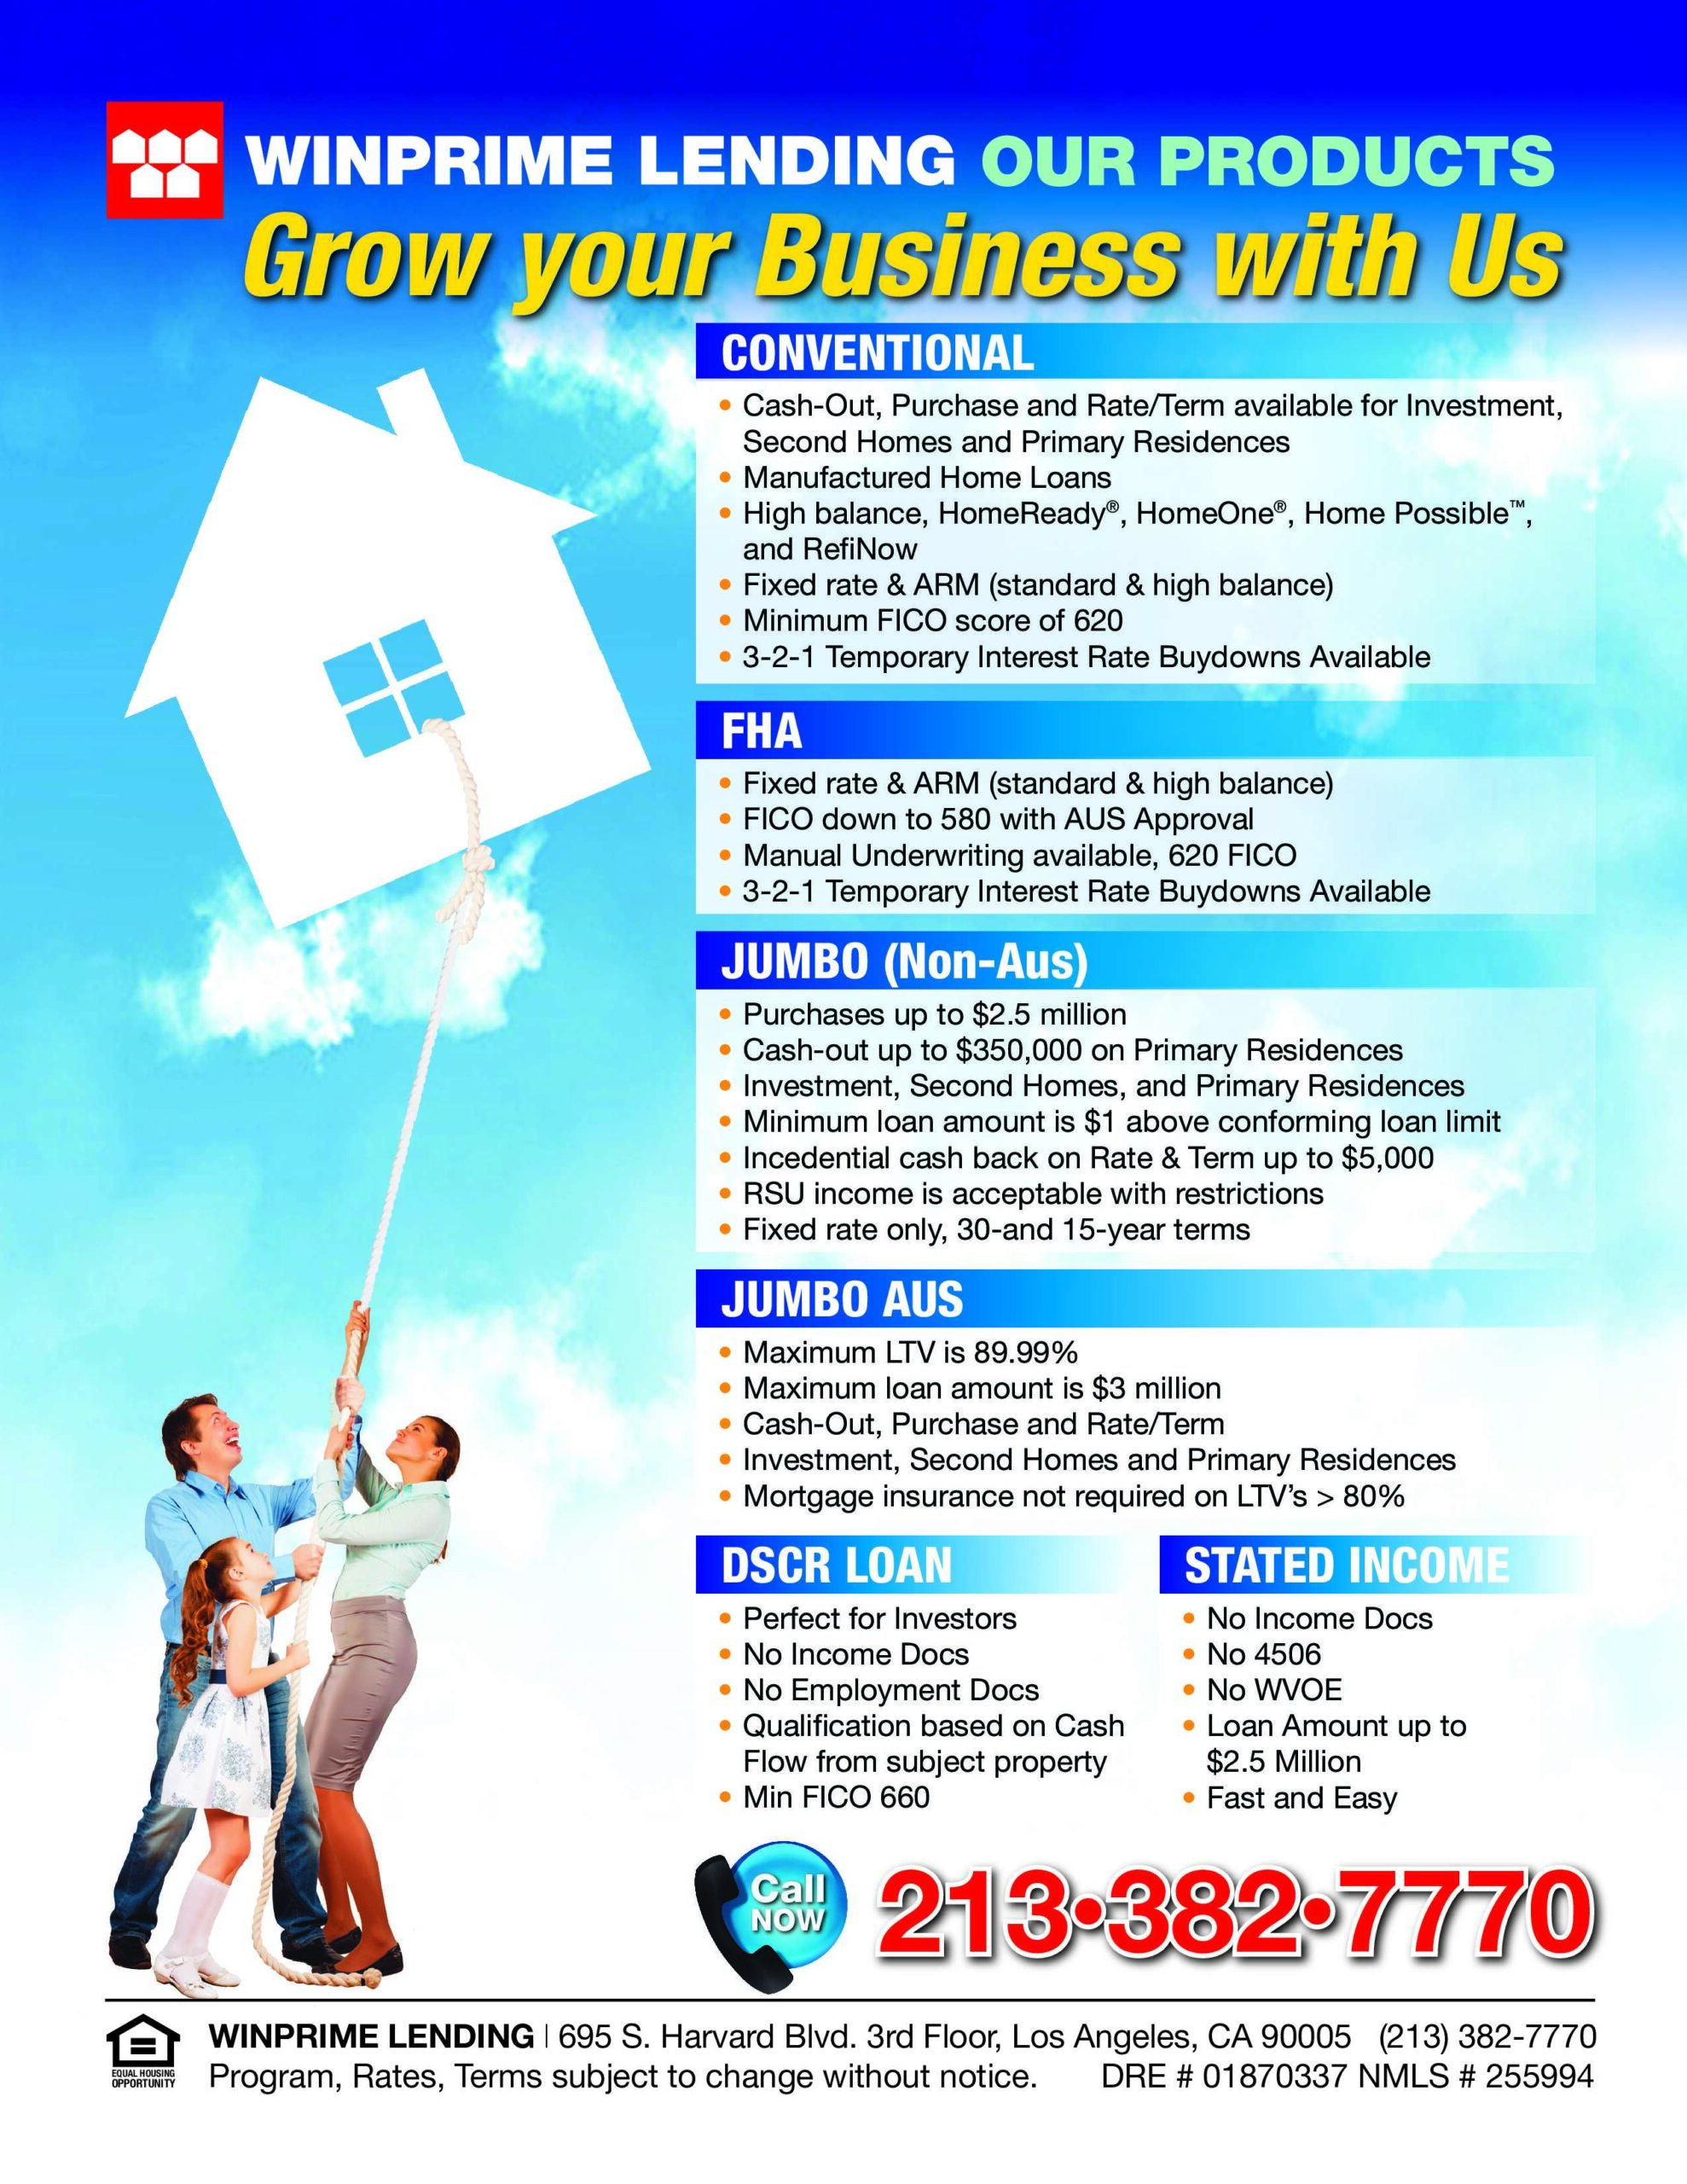 Grow Your Business with Us